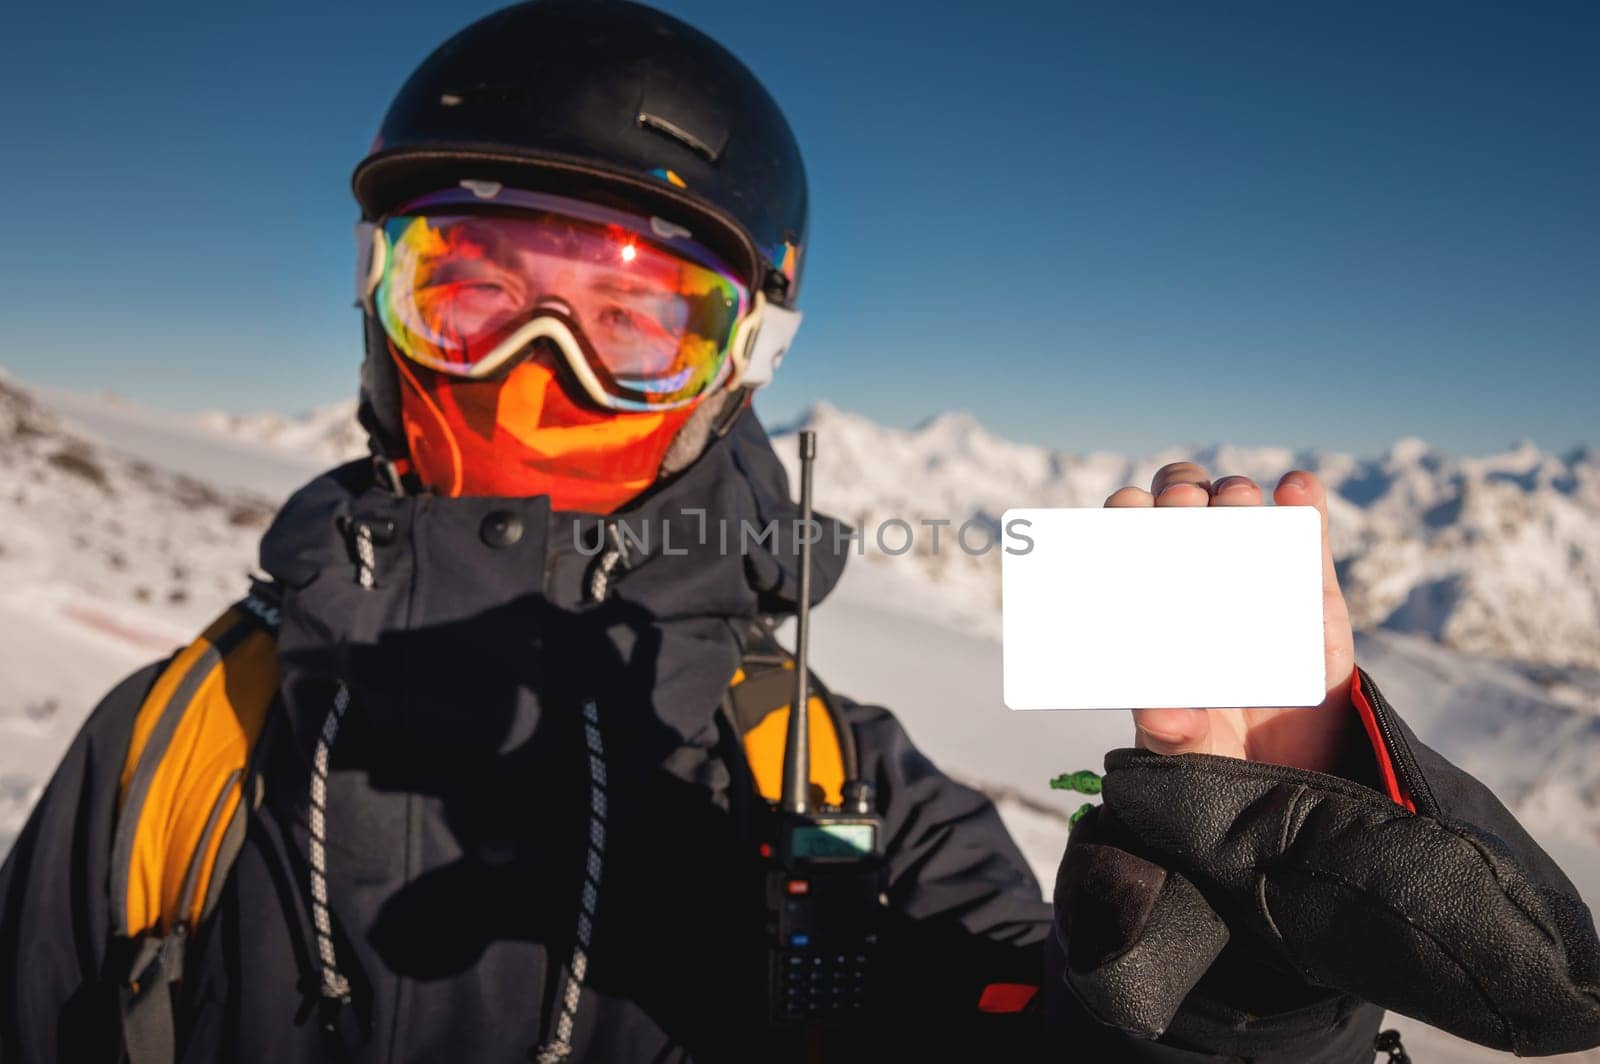 snowboarder holds an empty lift pass with a mountain in the background. Blank ski pass in the hand of a young skier in winter gear looking at the camera. Concept illustrating ski entry fee by yanik88